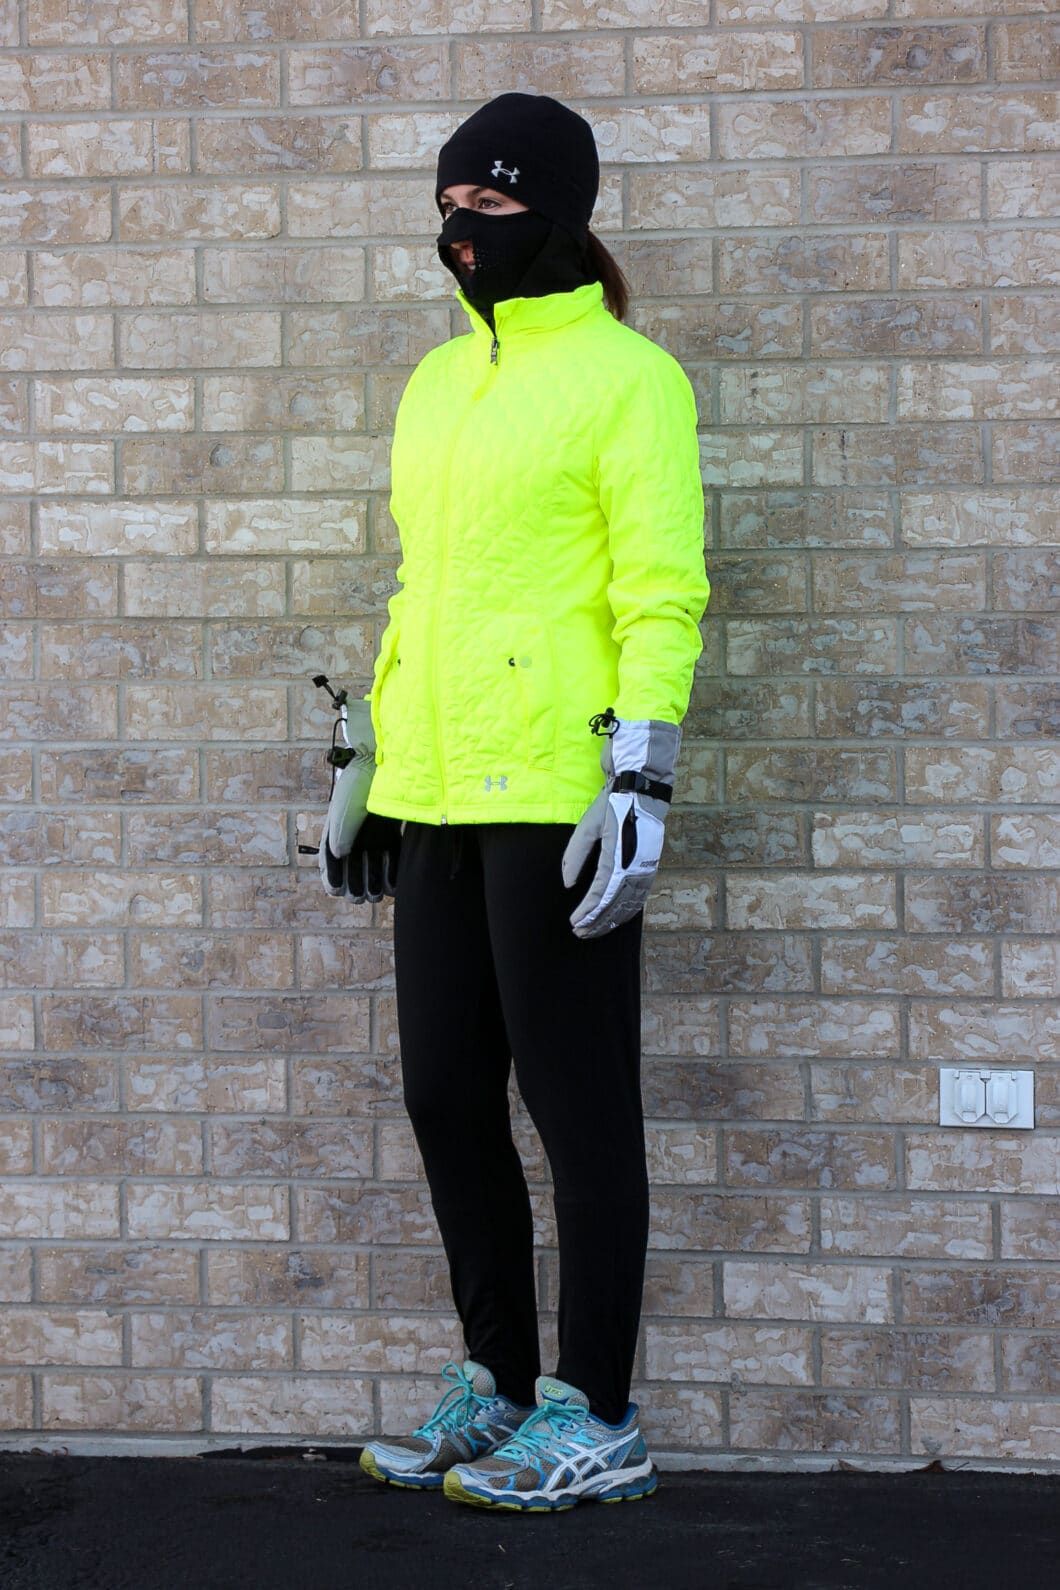 subzero weather running outfit